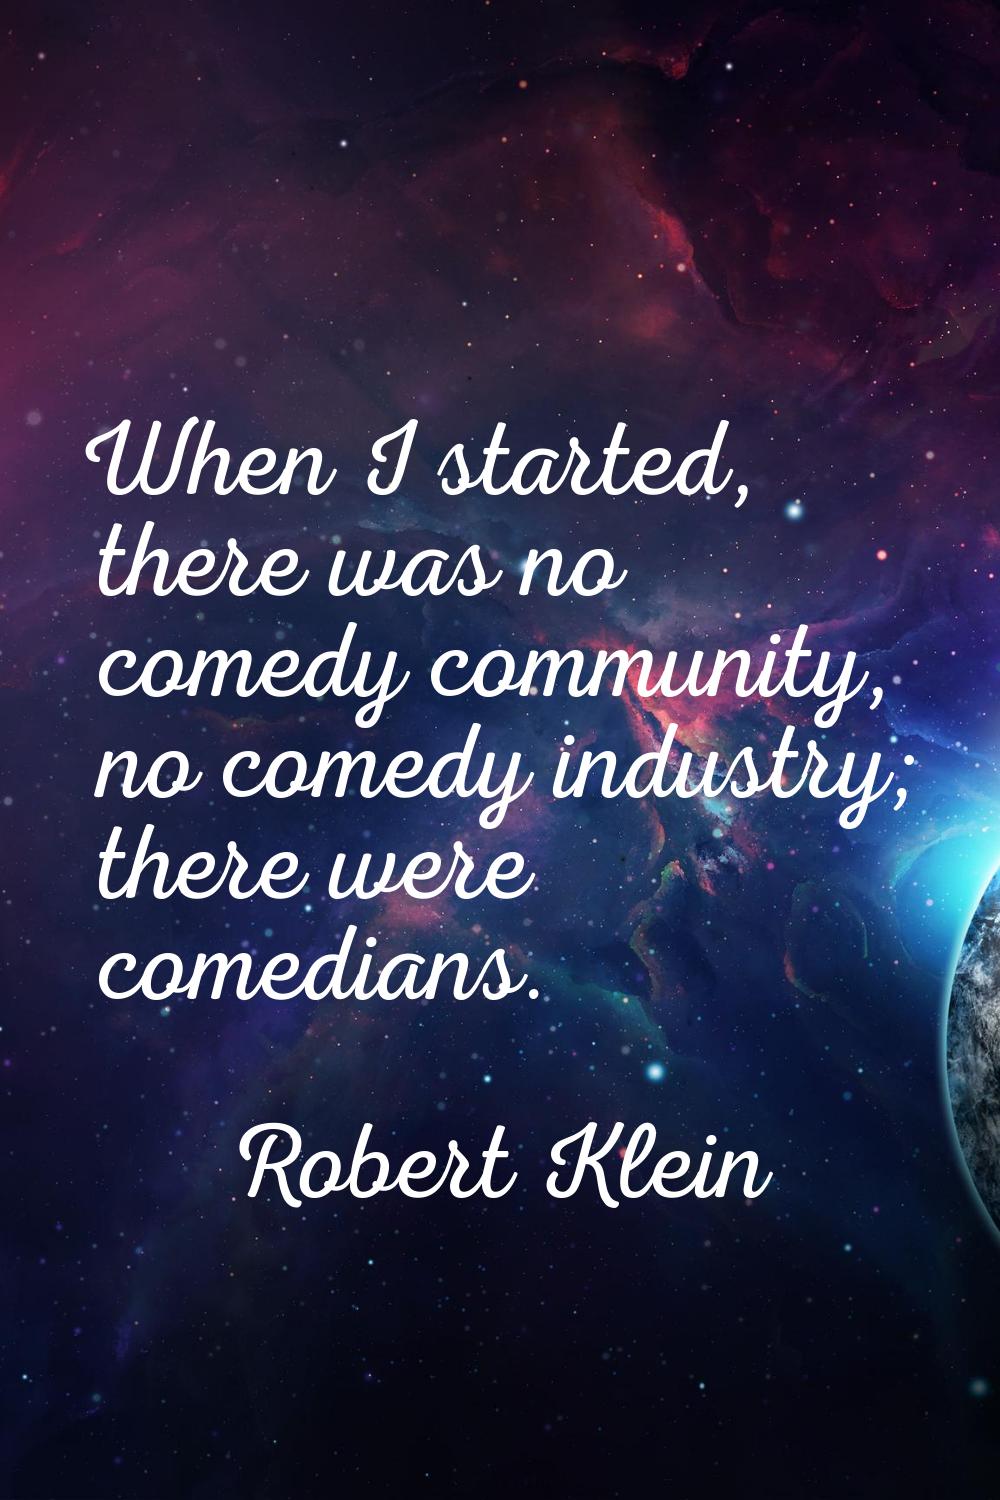 When I started, there was no comedy community, no comedy industry; there were comedians.